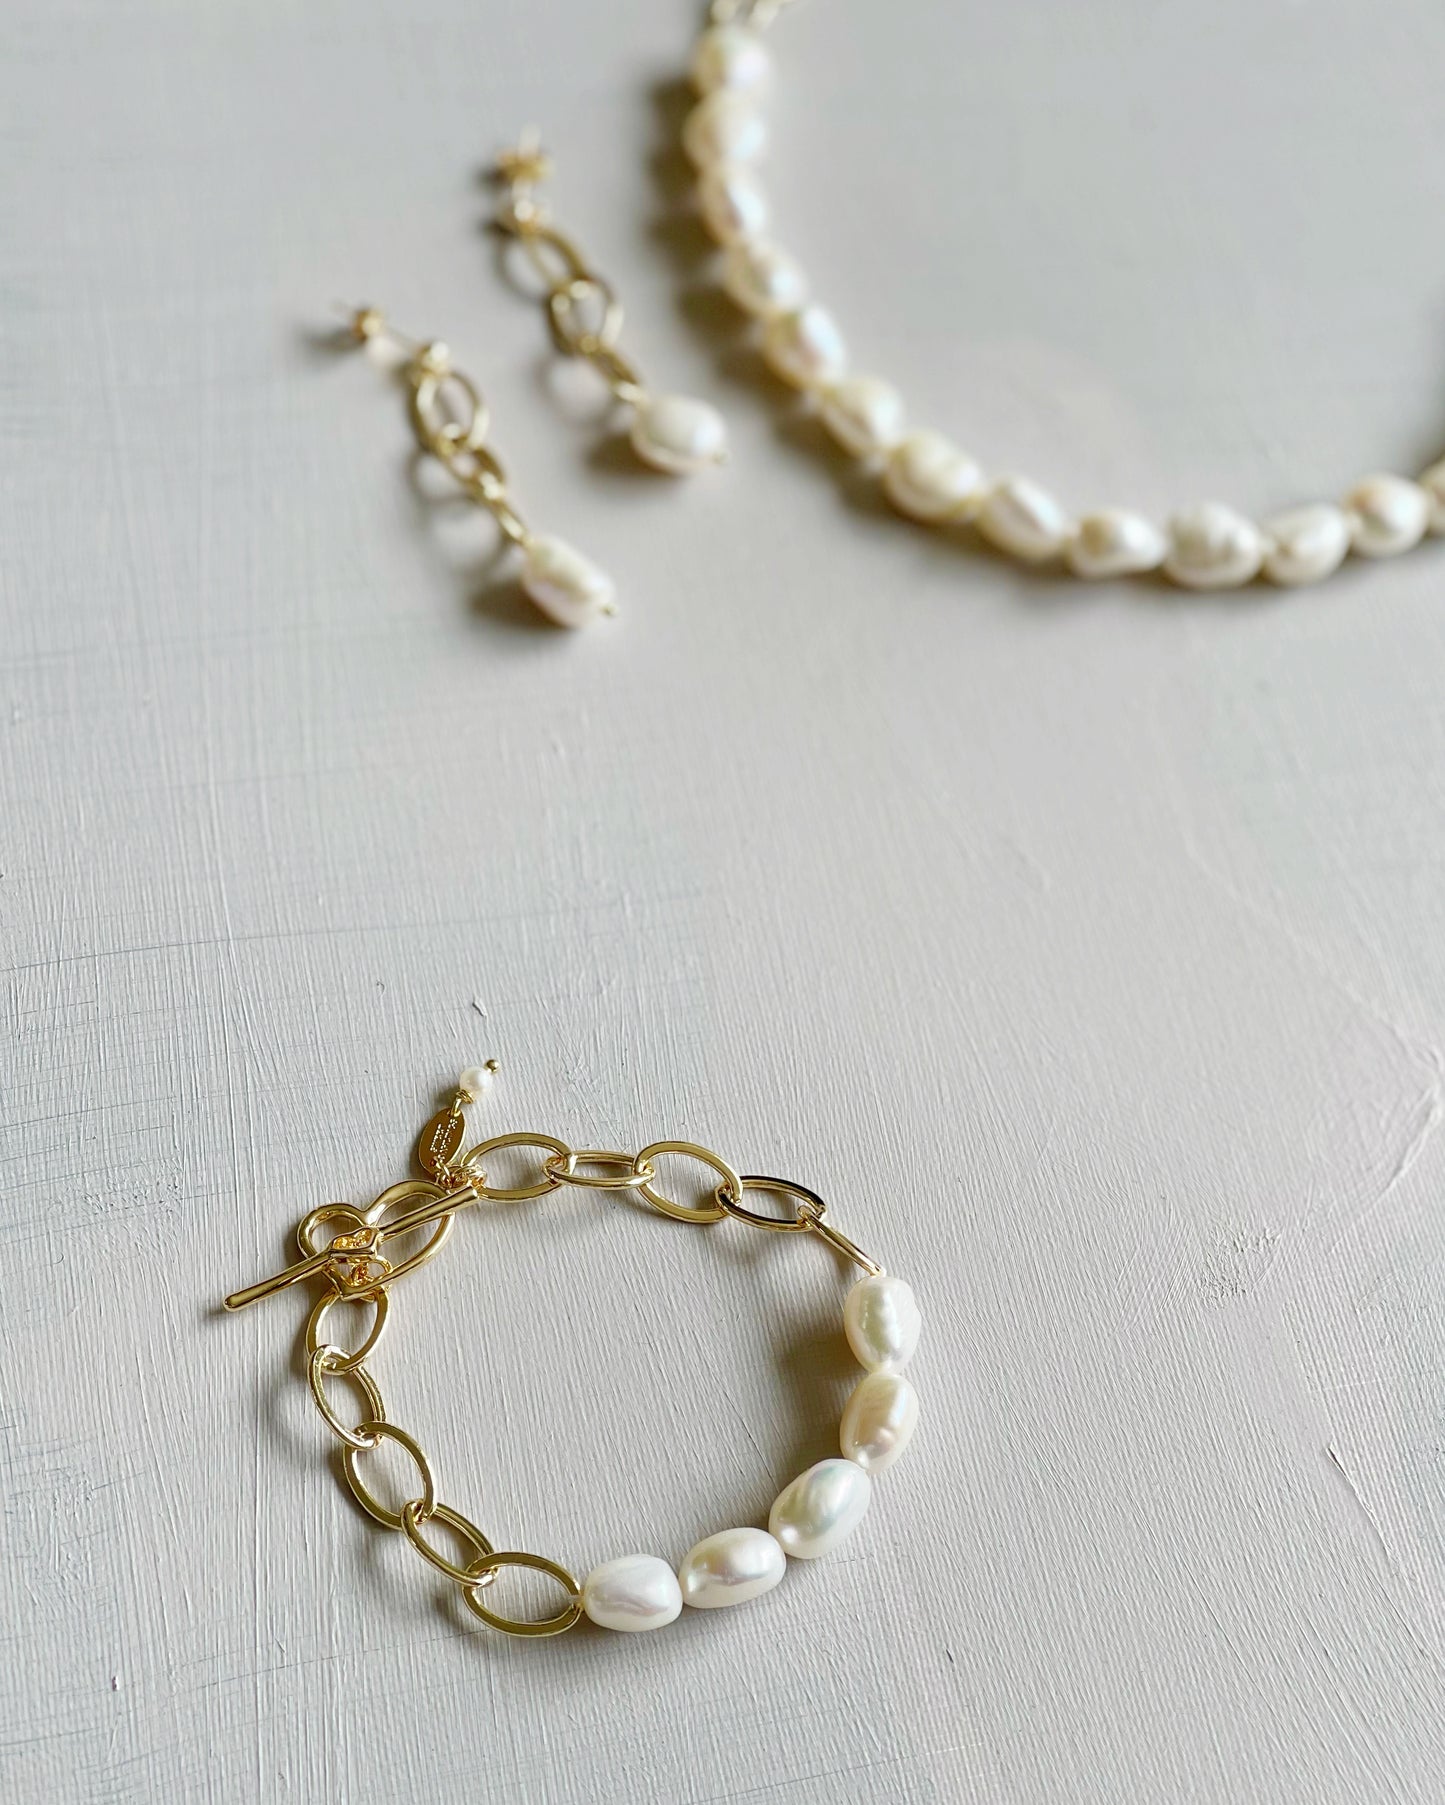 The Contrast Collection - Big freshwater pearl and chain earrings